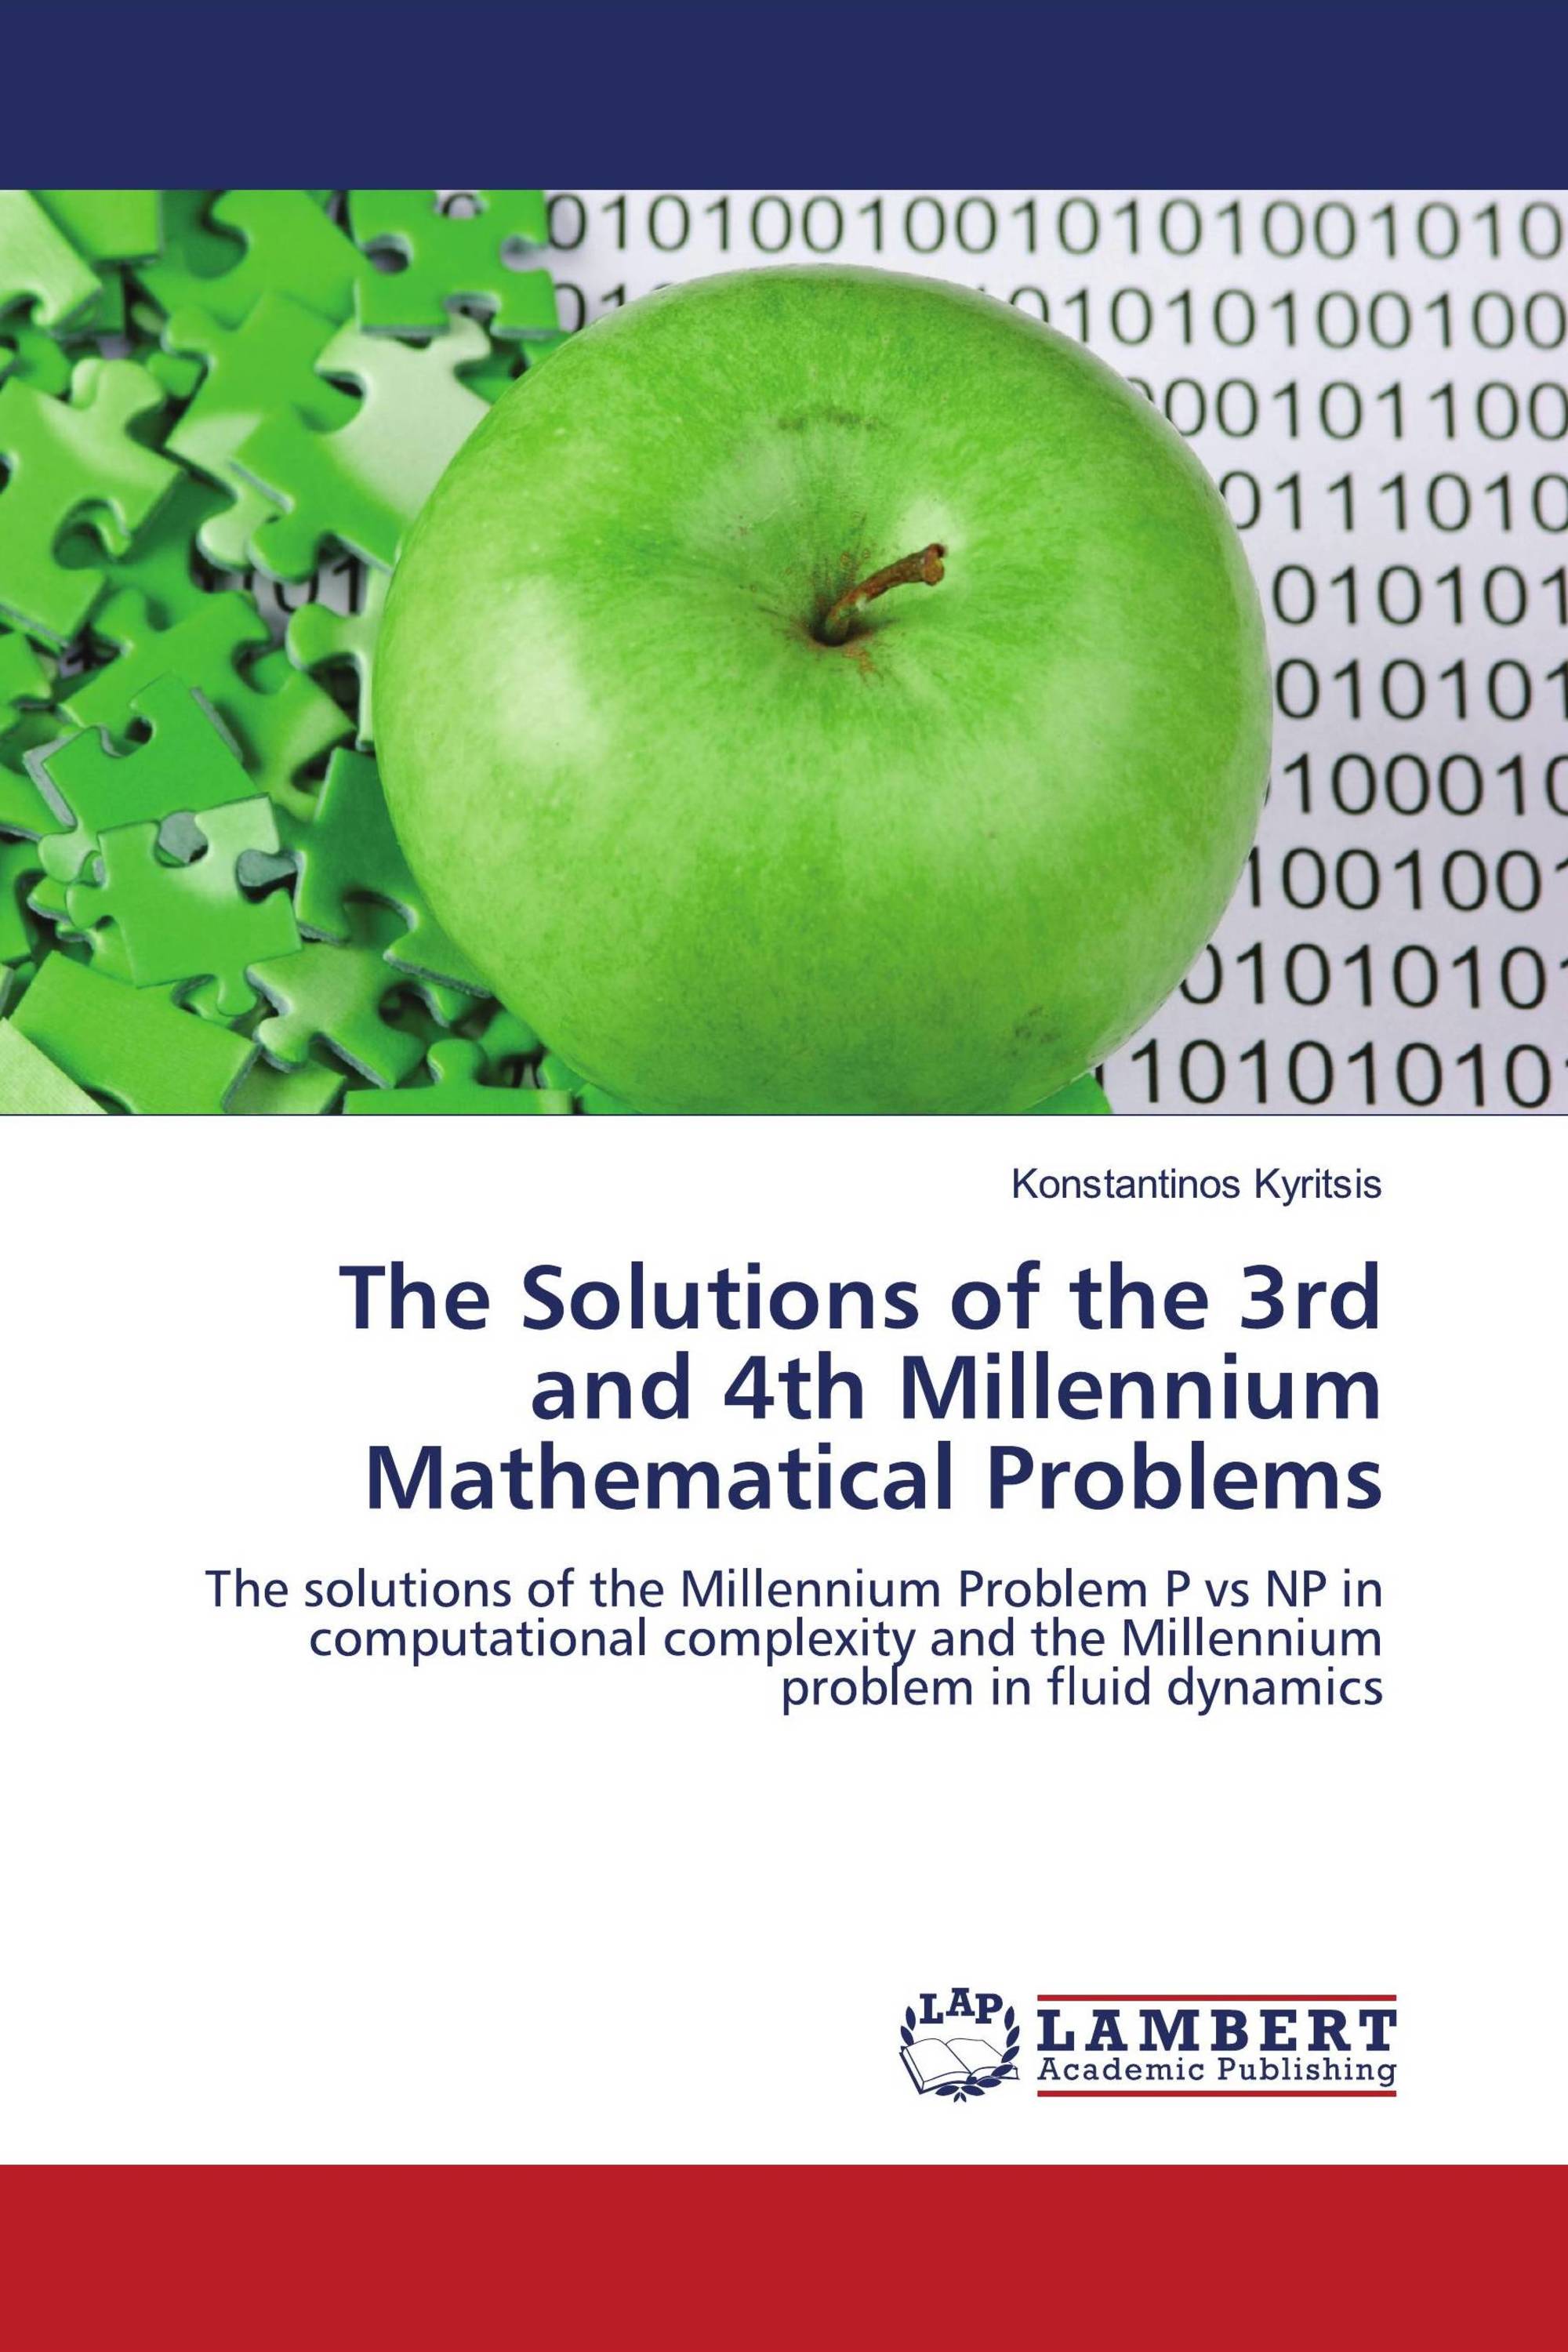 The Solutions of the 3rd and 4th Millennium Mathematical Problems